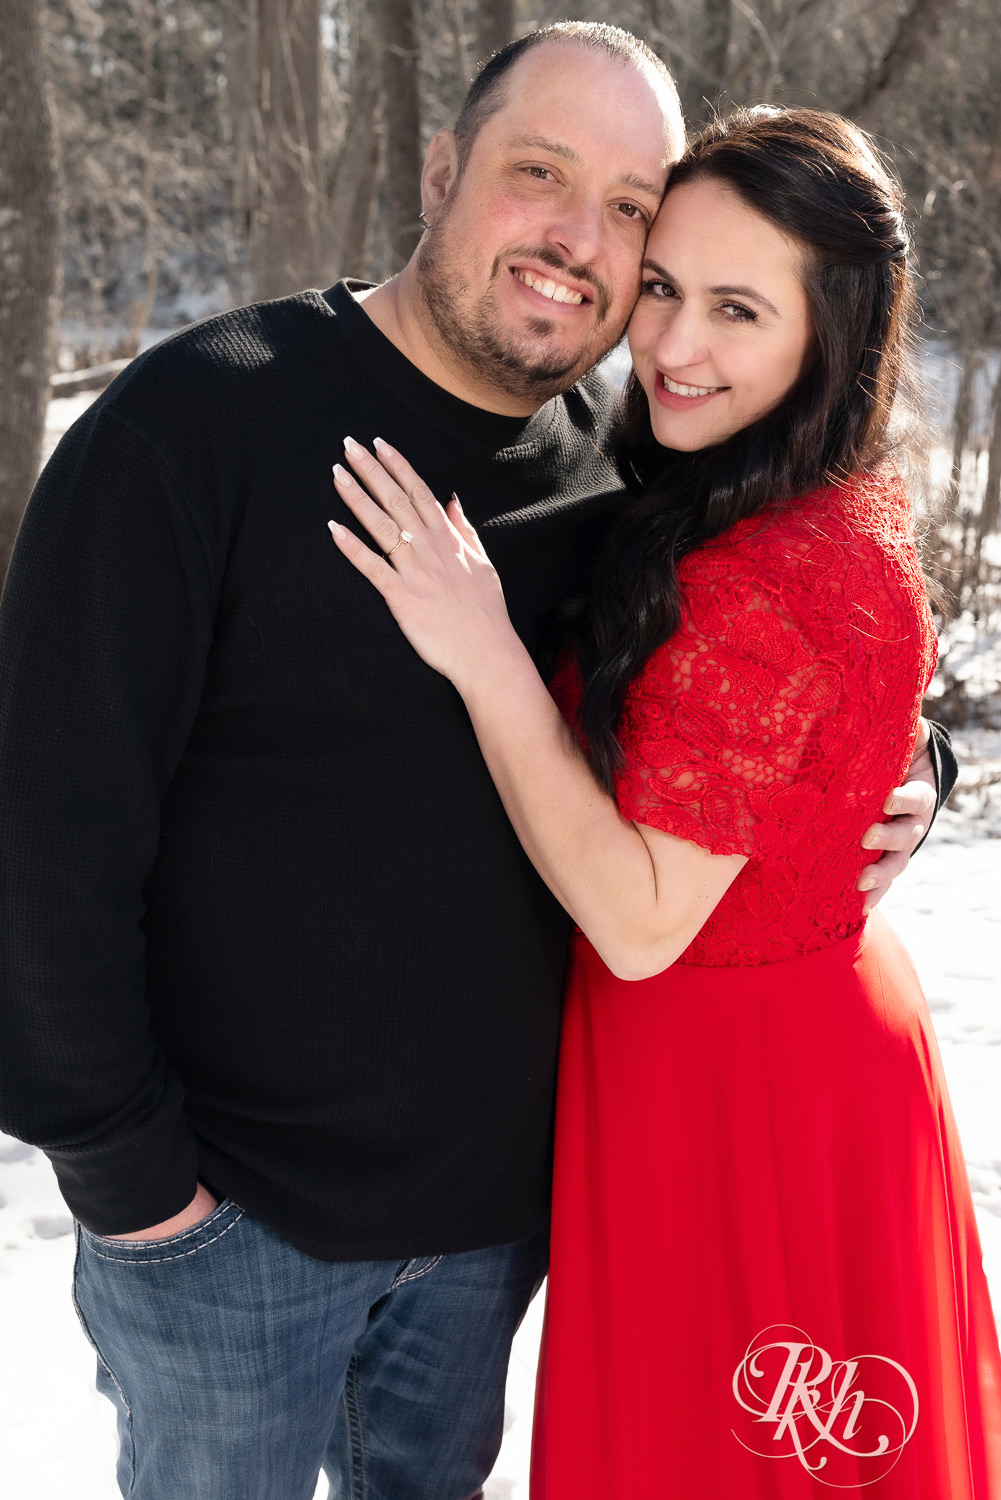 Man in jeans and woman in red dress smile in the woods during winter engagement photography in Pine City, Minnesota.